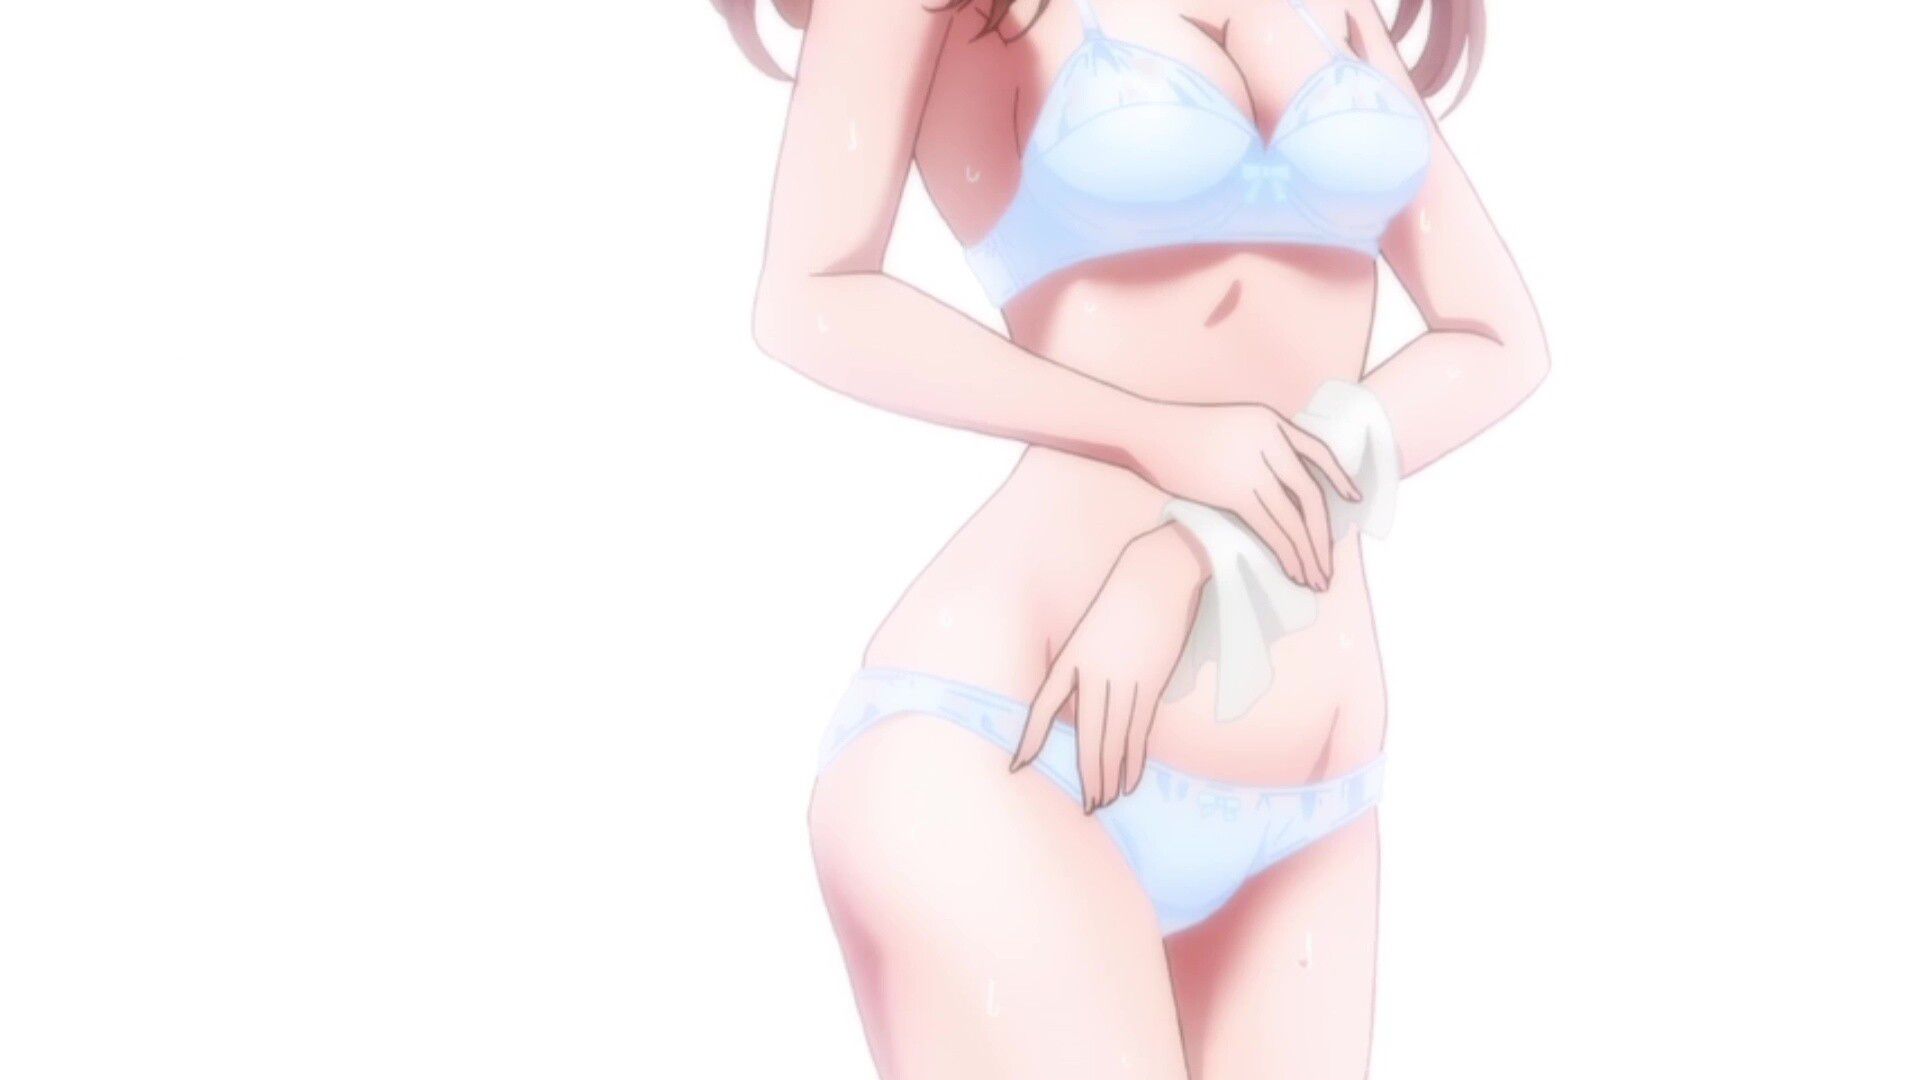 In episode 9 of the anime "Tomodachi Game", an erotic scene in which pants and bra are transparent in the depiction of underwear that is too erotic 16